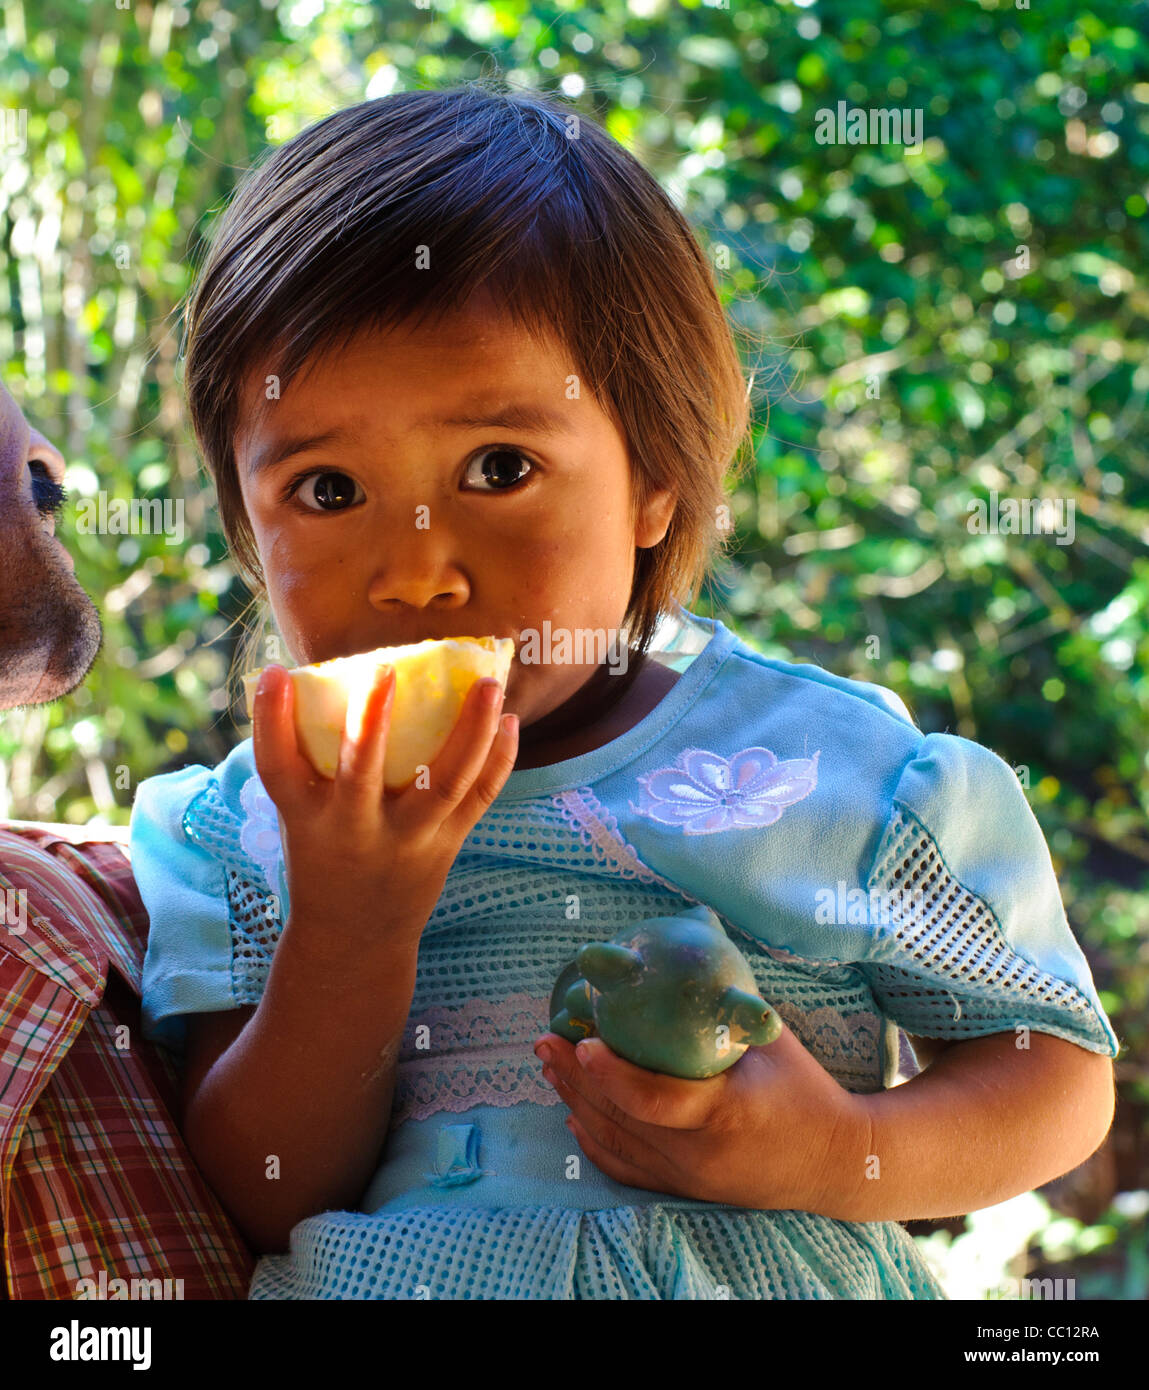 Young campesino girl eating an orange while her father holds her. Honduras Stock Photo